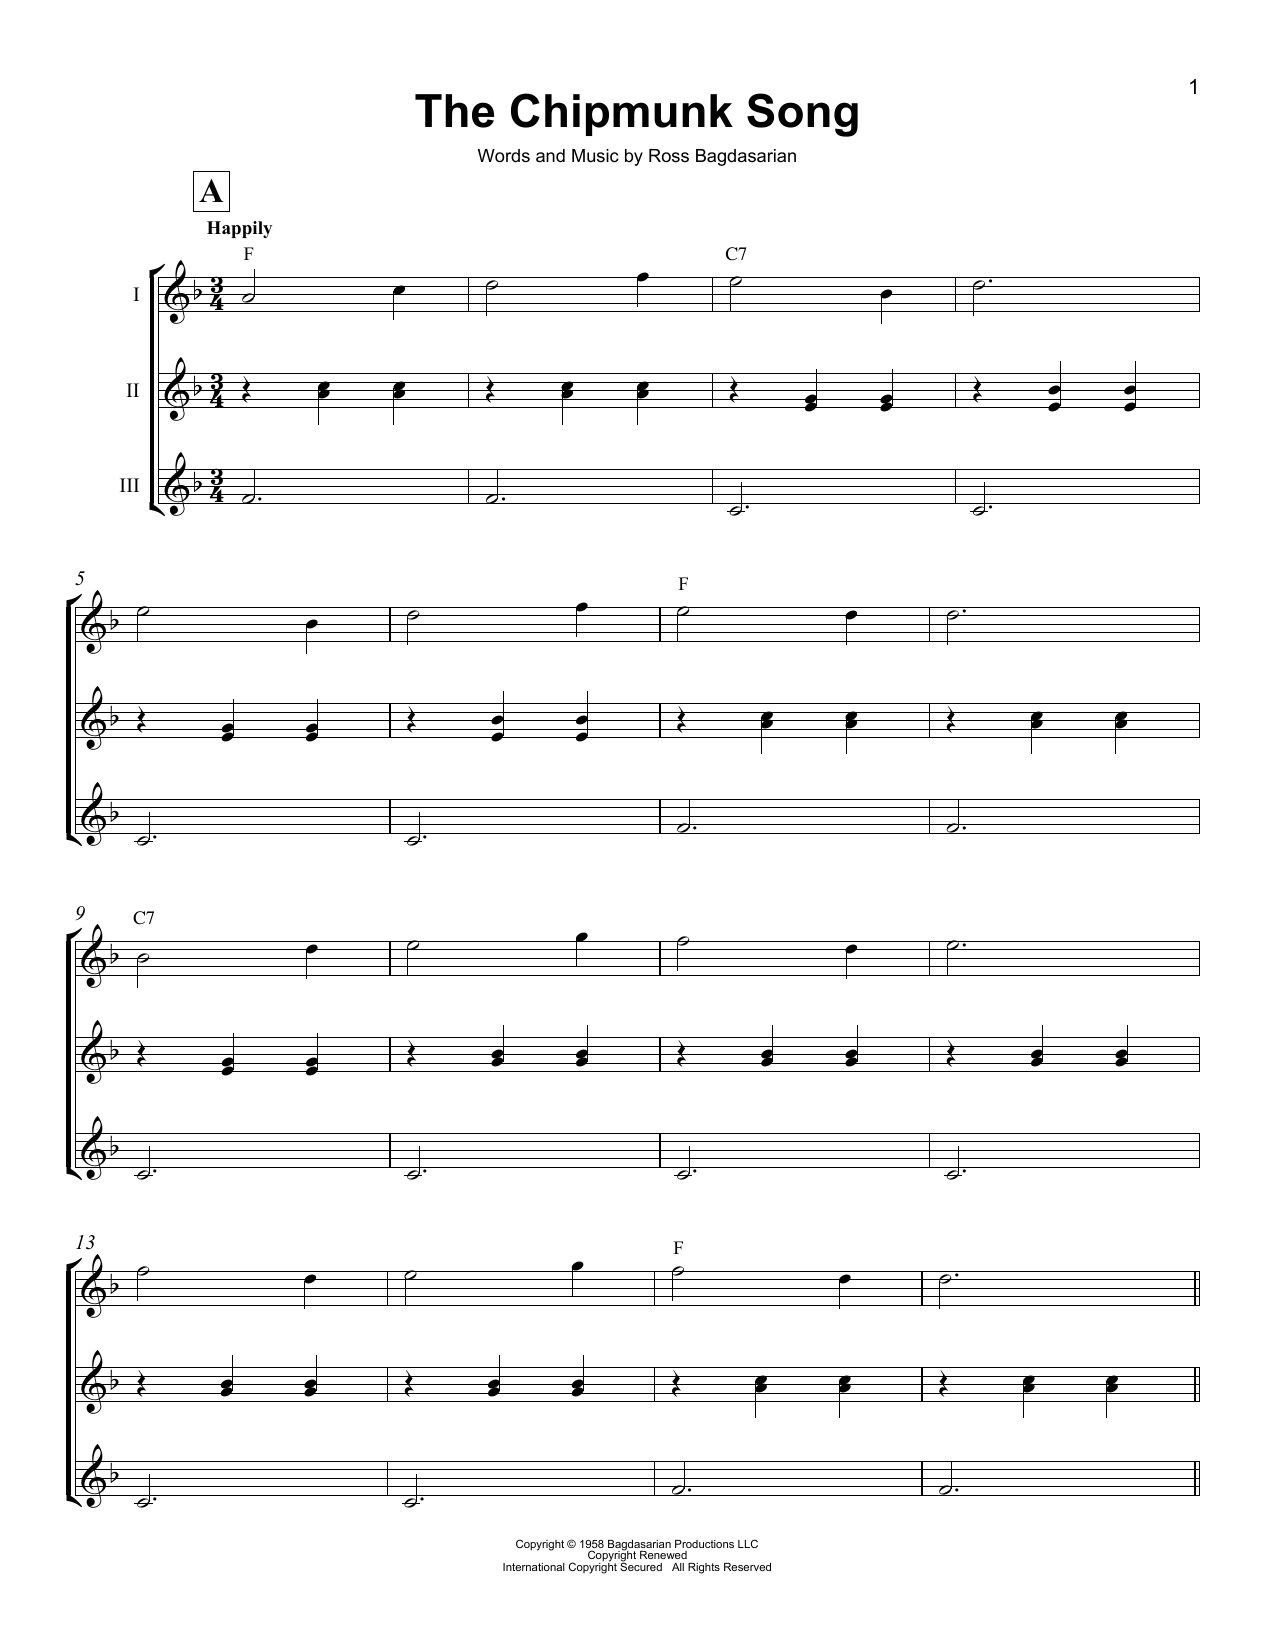 Download The Chipmunks The Chipmunk Song Sheet Music